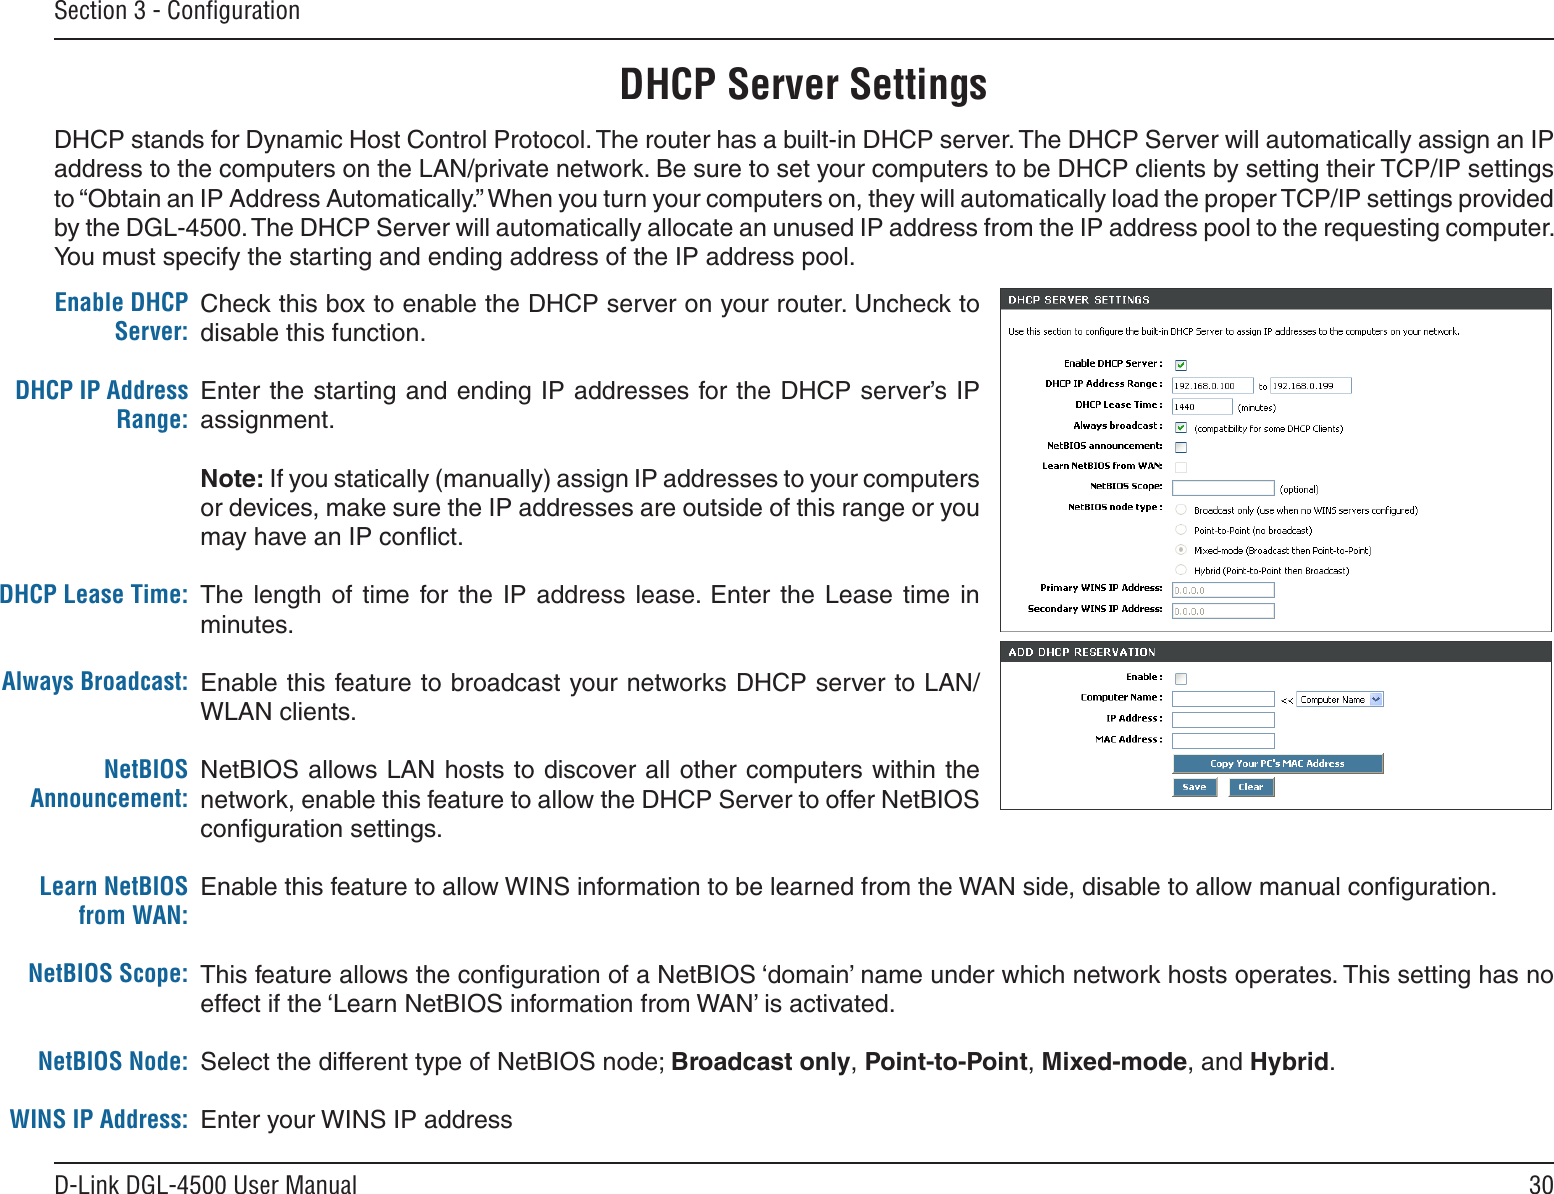 30D-Link DGL-4500 User ManualSection 3 - ConﬁgurationCheck this box to enable the DHCP server on your router. Uncheck to disable this function.Enter the starting and ending IP addresses for the DHCP server’s IP assignment.Note: If you statically (manually) assign IP addresses to your computers or devices, make sure the IP addresses are outside of this range or you may have an IP conﬂict. The  length  of  time  for  the  IP  address  lease.  Enter  the  Lease  time  in minutes.Enable this feature to broadcast your networks DHCP server to LAN/WLAN clients.NetBIOS allows LAN hosts to discover all other computers within the network, enable this feature to allow the DHCP Server to offer NetBIOS conﬁguration settings.Enable this feature to allow WINS information to be learned from the WAN side, disable to allow manual conﬁguration.This feature allows the conﬁguration of a NetBIOS ‘domain’ name under which network hosts operates. This setting has no effect if the ‘Learn NetBIOS information from WAN’ is activated.Select the different type of NetBIOS node; Broadcast only, Point-to-Point, Mixed-mode, and Hybrid.Enter your WINS IP addressEnable DHCP Server:DHCP IP Address Range:DHCP Lease Time:Always Broadcast:NetBIOS Announcement:Learn NetBIOS from WAN:NetBIOS Scope:NetBIOS Node:WINS IP Address:DHCP Server SettingsDHCP stands for Dynamic Host Control Protocol. The router has a built-in DHCP server. The DHCP Server will automatically assign an IP address to the computers on the LAN/private network. Be sure to set your computers to be DHCP clients by setting their TCP/IP settings to “Obtain an IP Address Automatically.” When you turn your computers on, they will automatically load the proper TCP/IP settings provided by the DGL-4500. The DHCP Server will automatically allocate an unused IP address from the IP address pool to the requesting computer. You must specify the starting and ending address of the IP address pool.